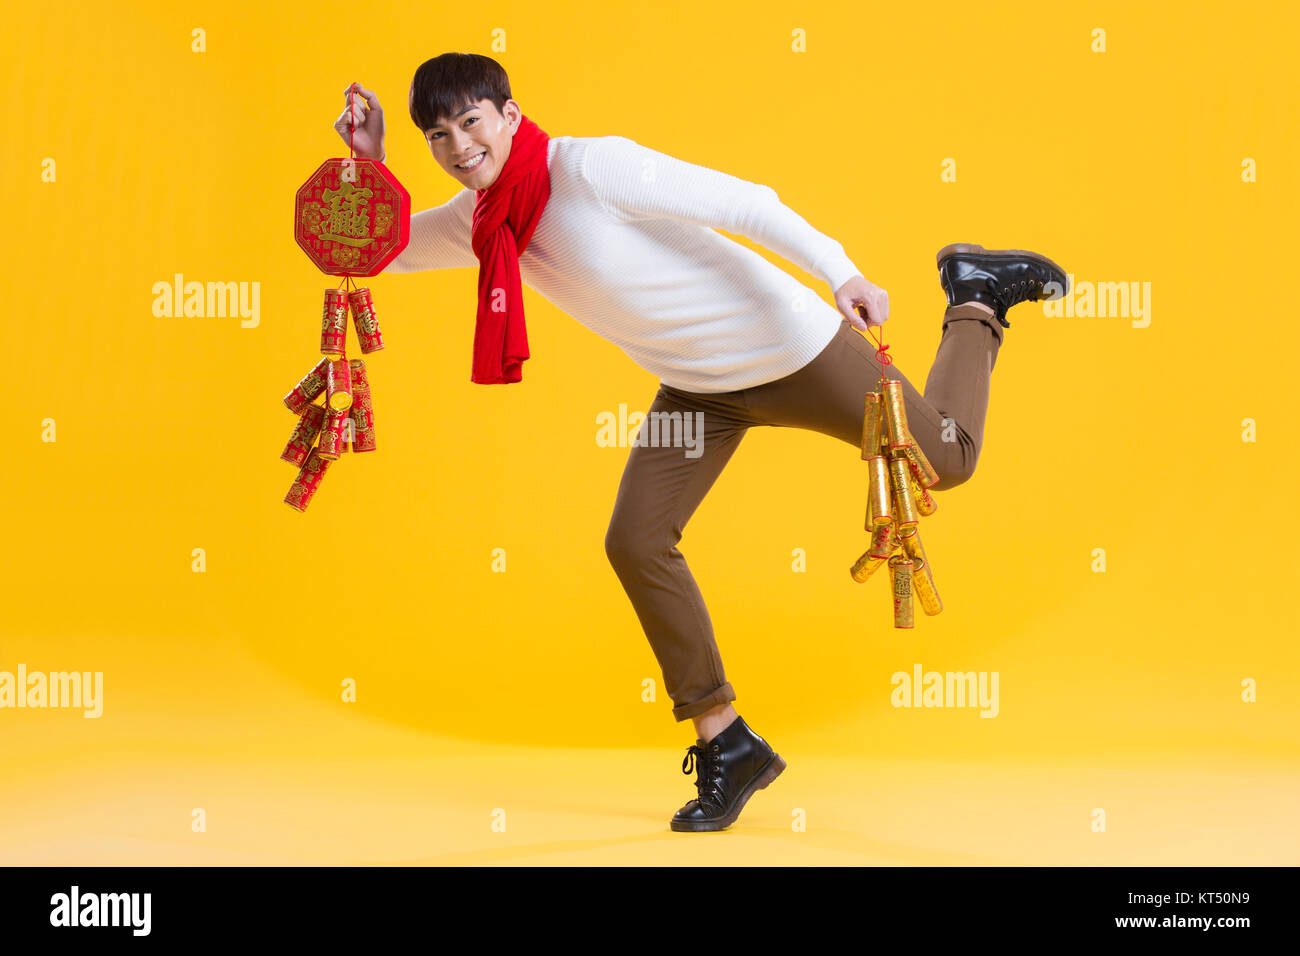 Cheerful young man celebrating Chinese new year with petards Stock Photo